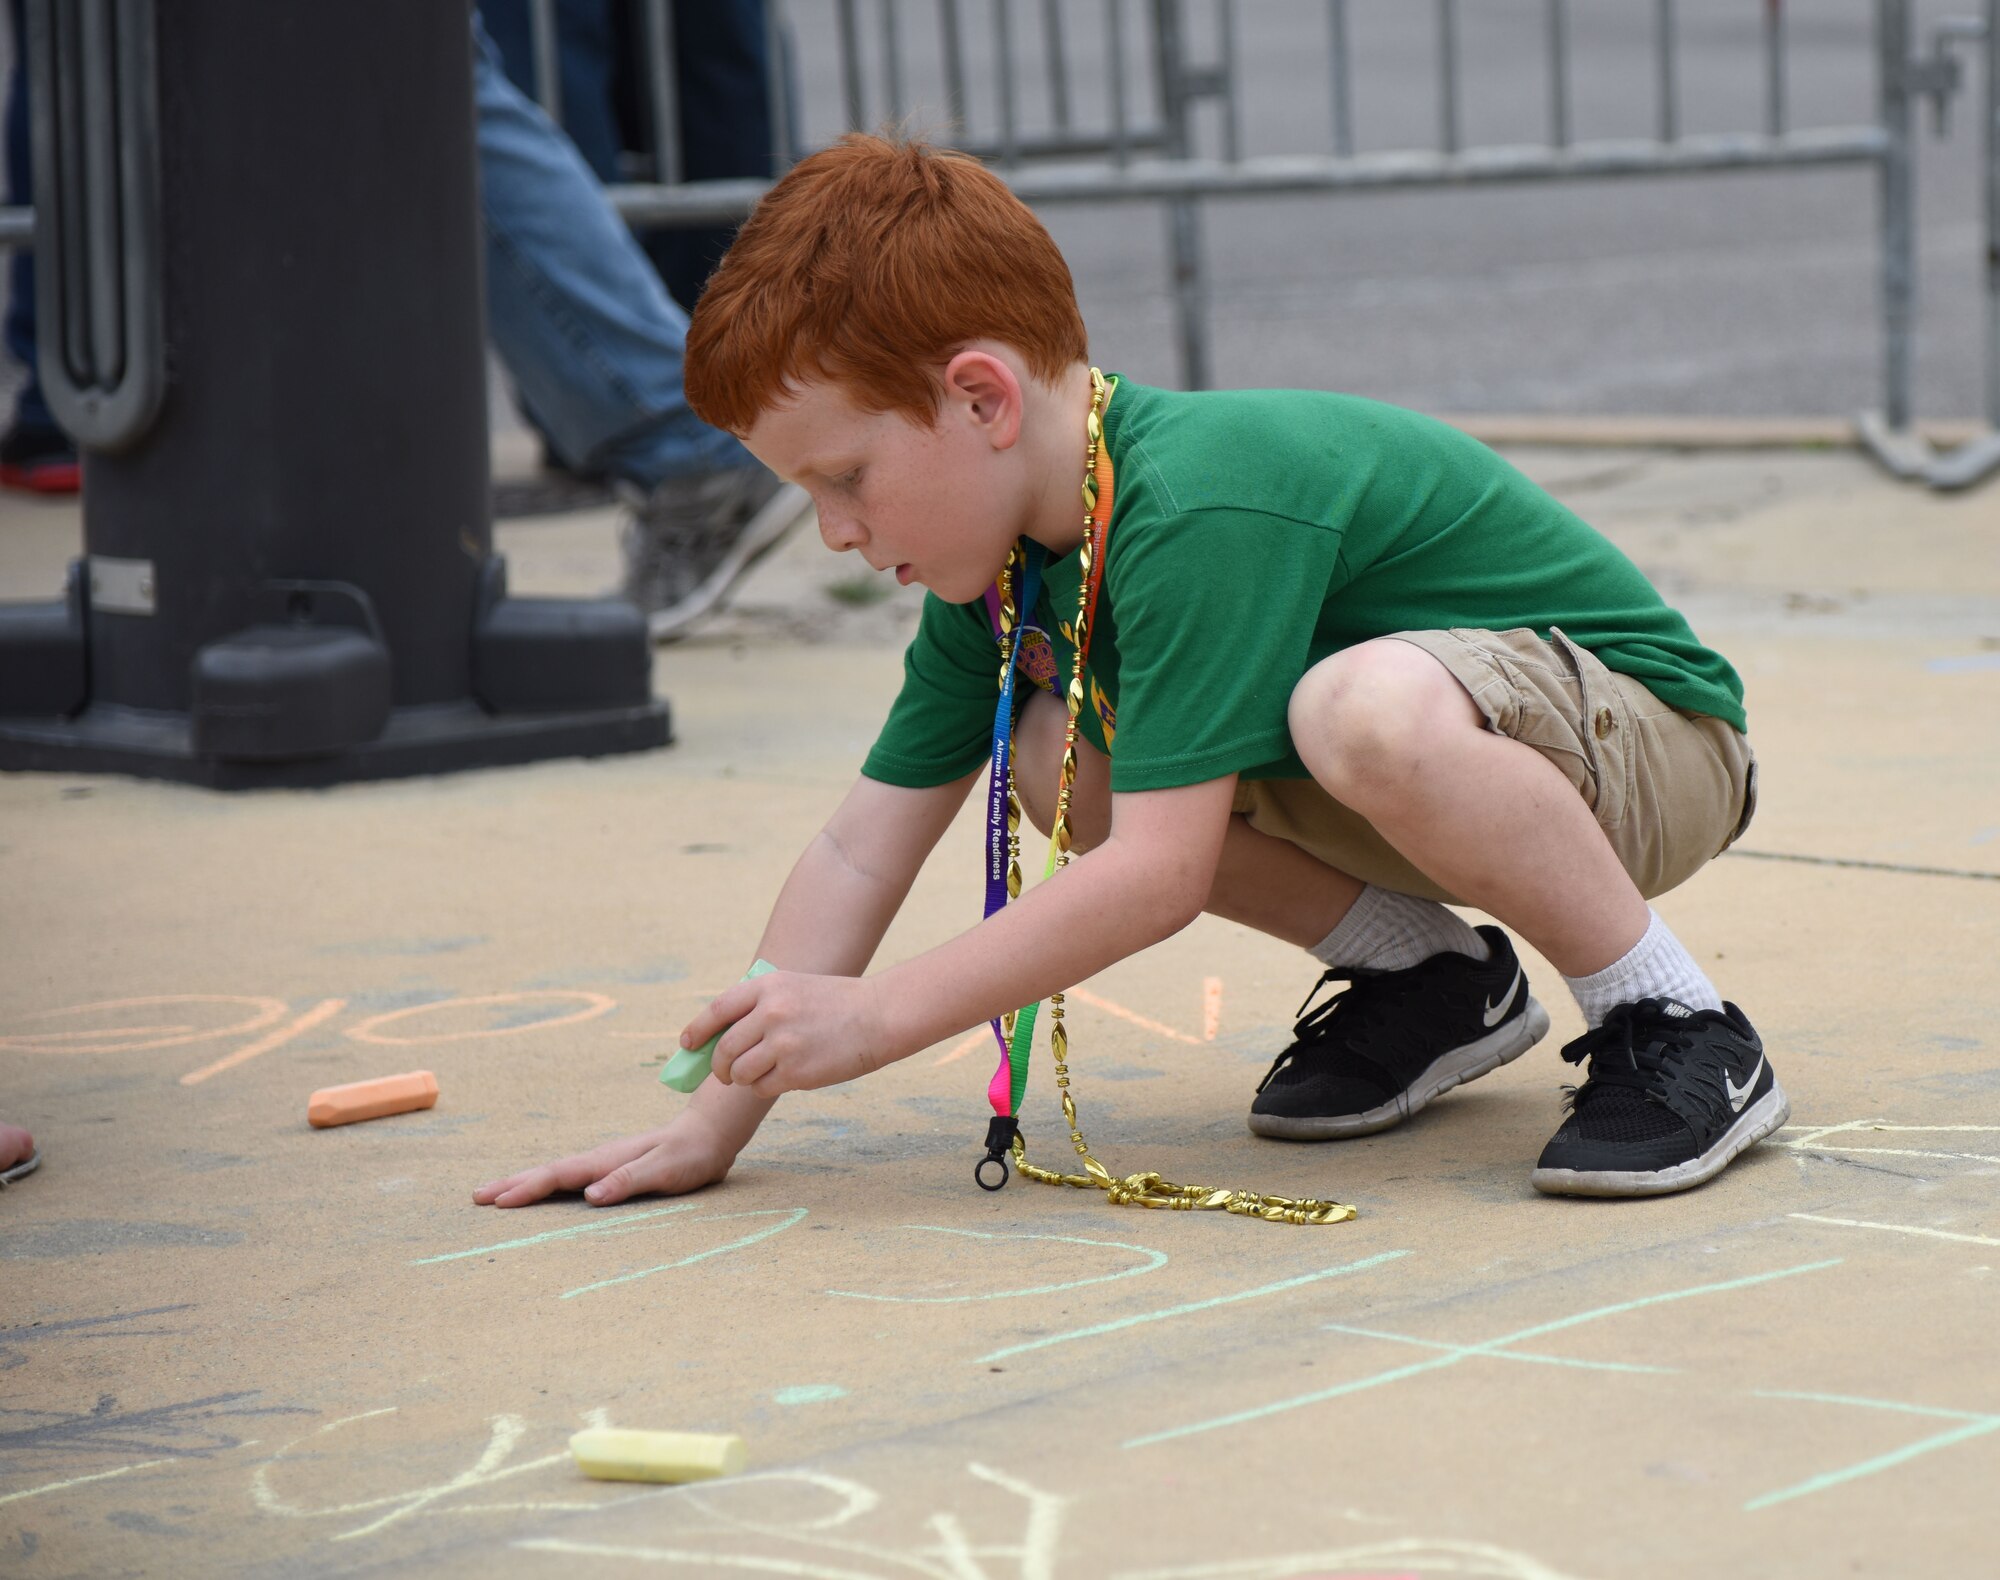 Atticus Fraites, son of Staff Sgt. Douglas Fraites, 85th Engineering Installation Squadron radio frequency transmissions team chief, draws on the side walk during the Gulf Coast Carnival Association Mardi Gras parade Feb. 28, 2017, in Biloxi, Miss. The 81st Force Support Squadron’s Airman and Family Readiness Center staff invited families of deployed members to the event and provided food and entertainment to them prior to the start of the parade. (U.S. Air Force photo by Kemberly Groue)